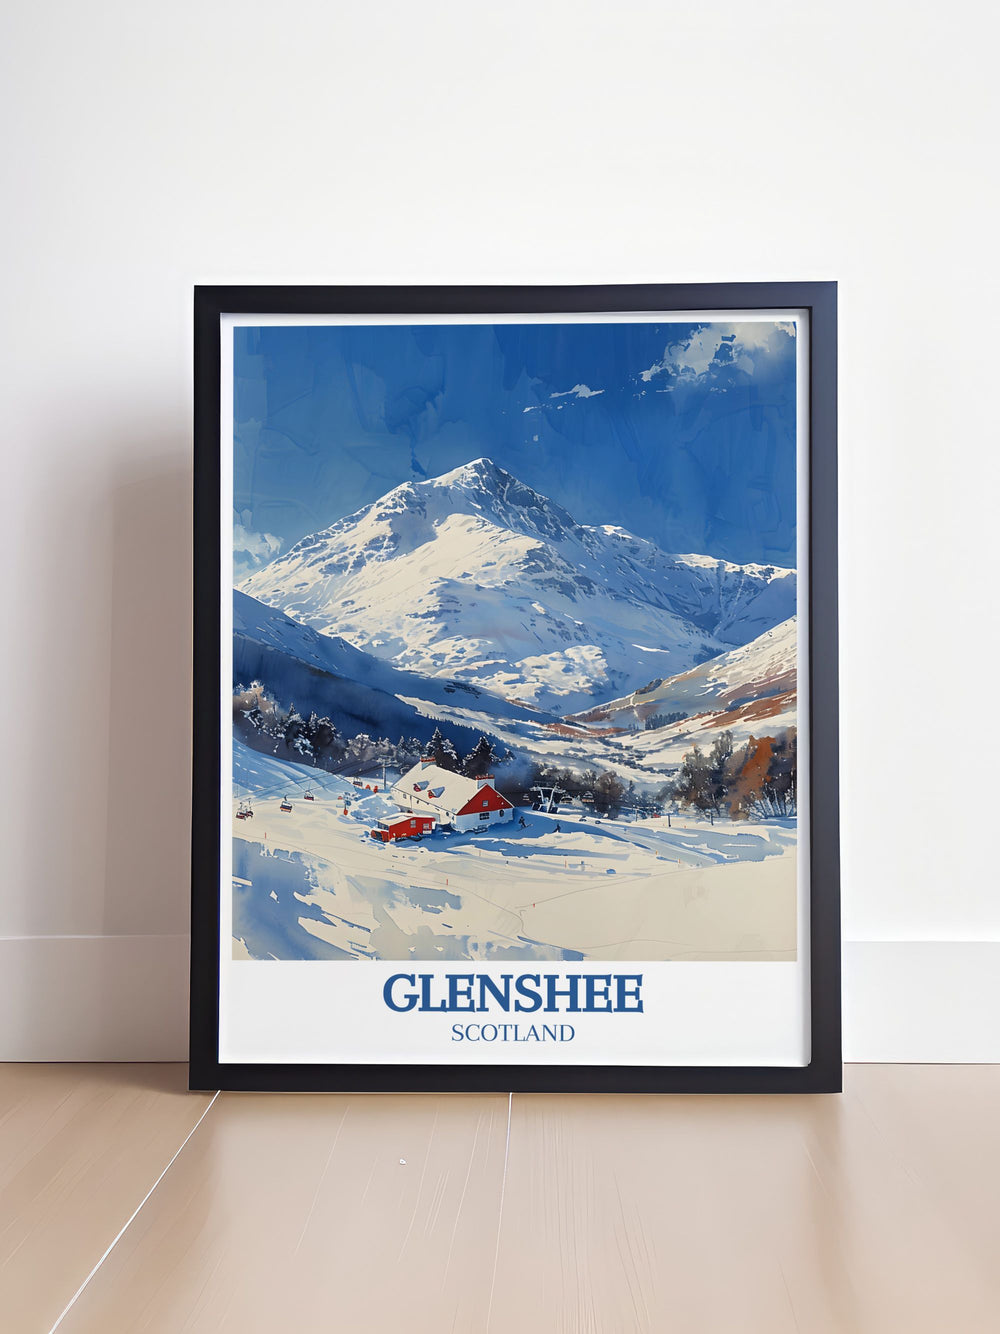 Celebrating the grandeur of the Grampian Mountains, this travel poster features the ranges iconic peaks and rugged terrain. Ideal for outdoor enthusiasts, this artwork captures the natural splendor of Scotlands highlands.